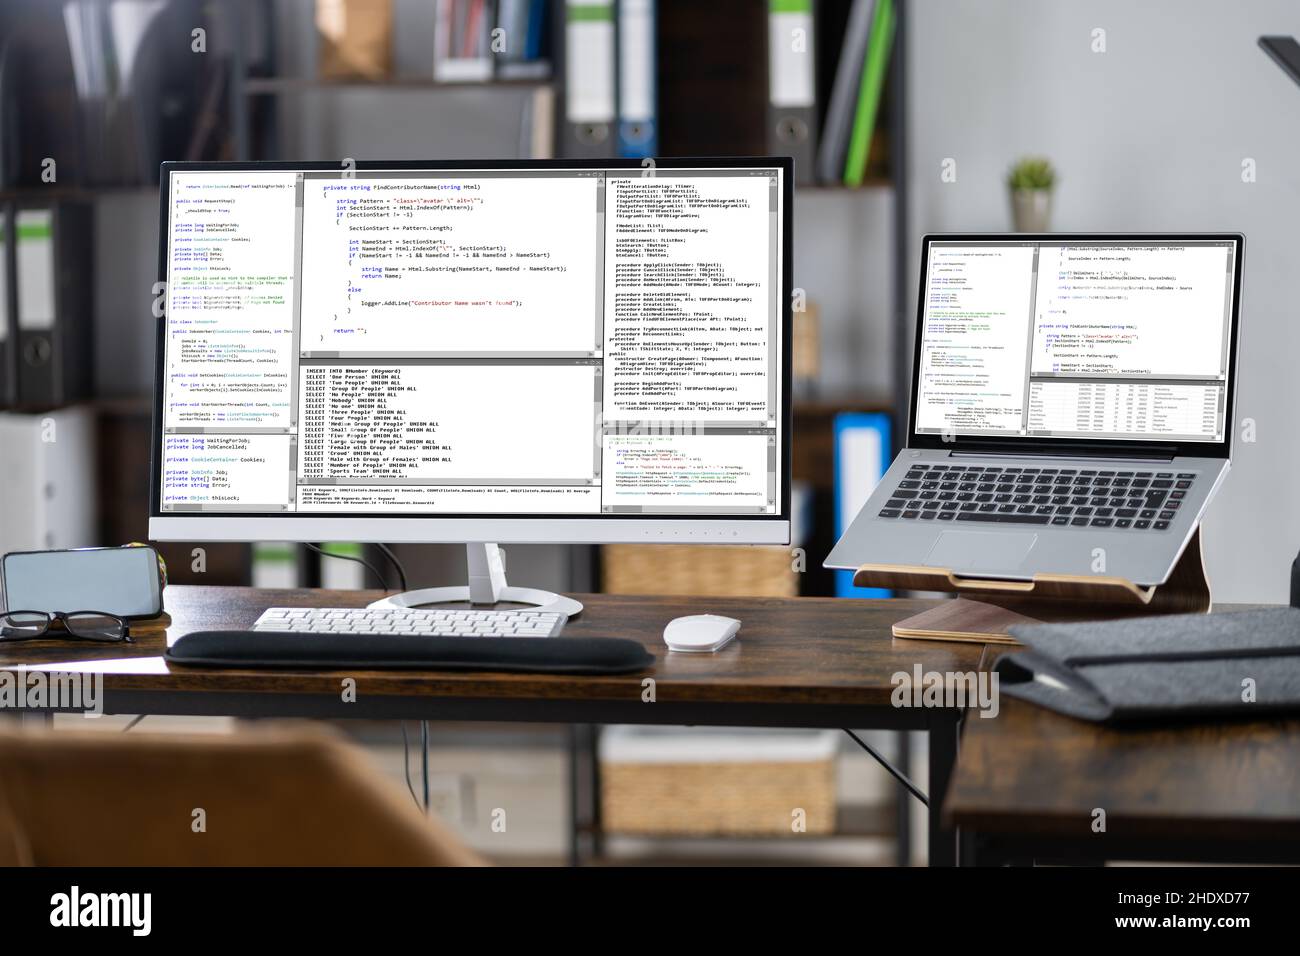 Developer Computer In Office With Programming Code Stock Photo